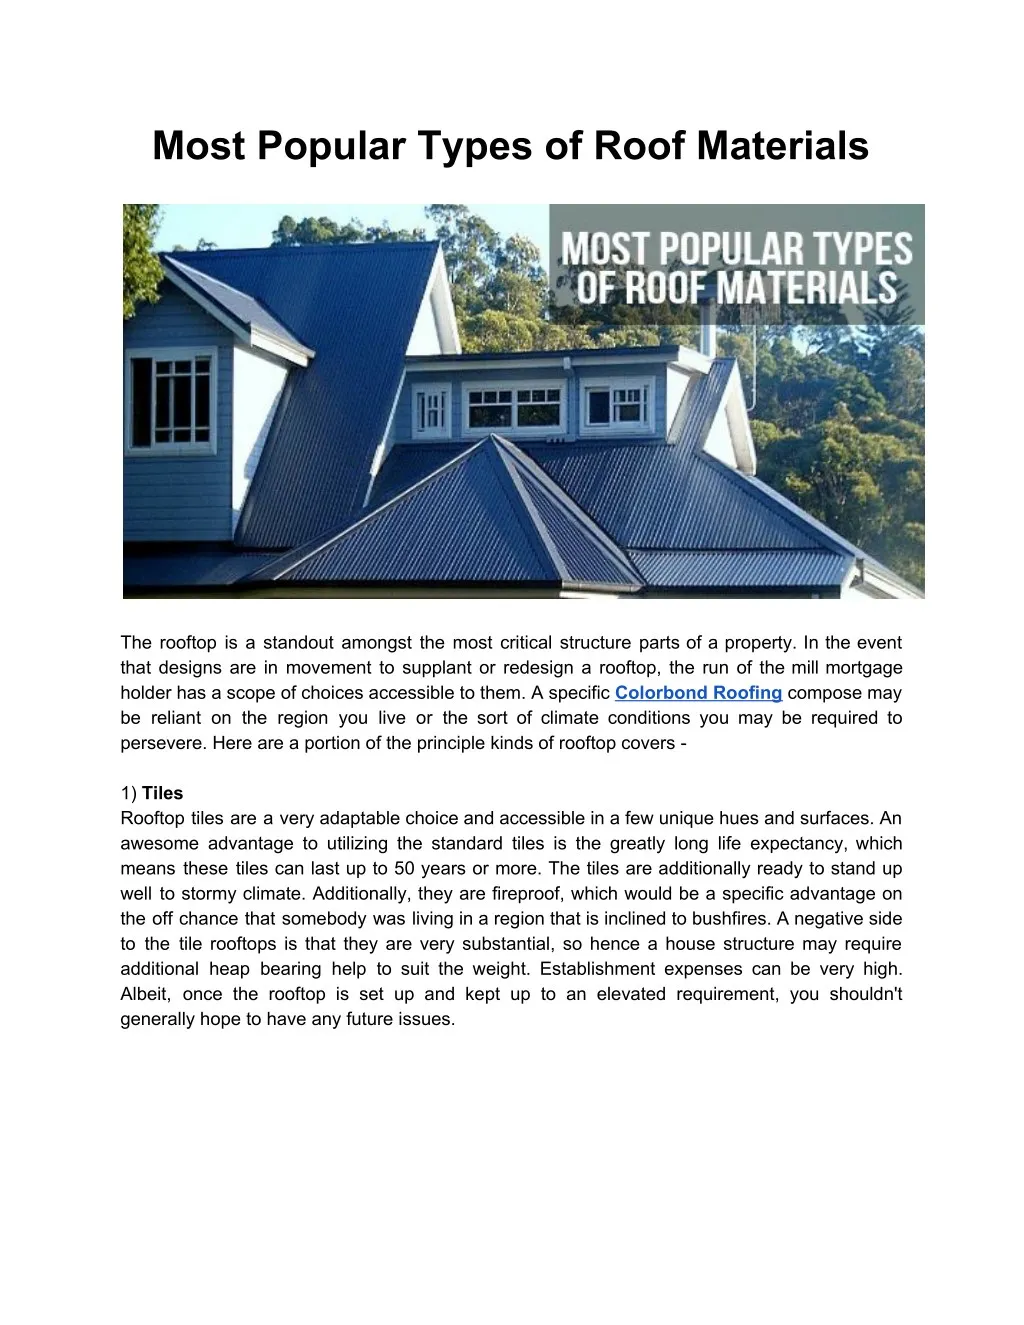 most popular types of roof materials